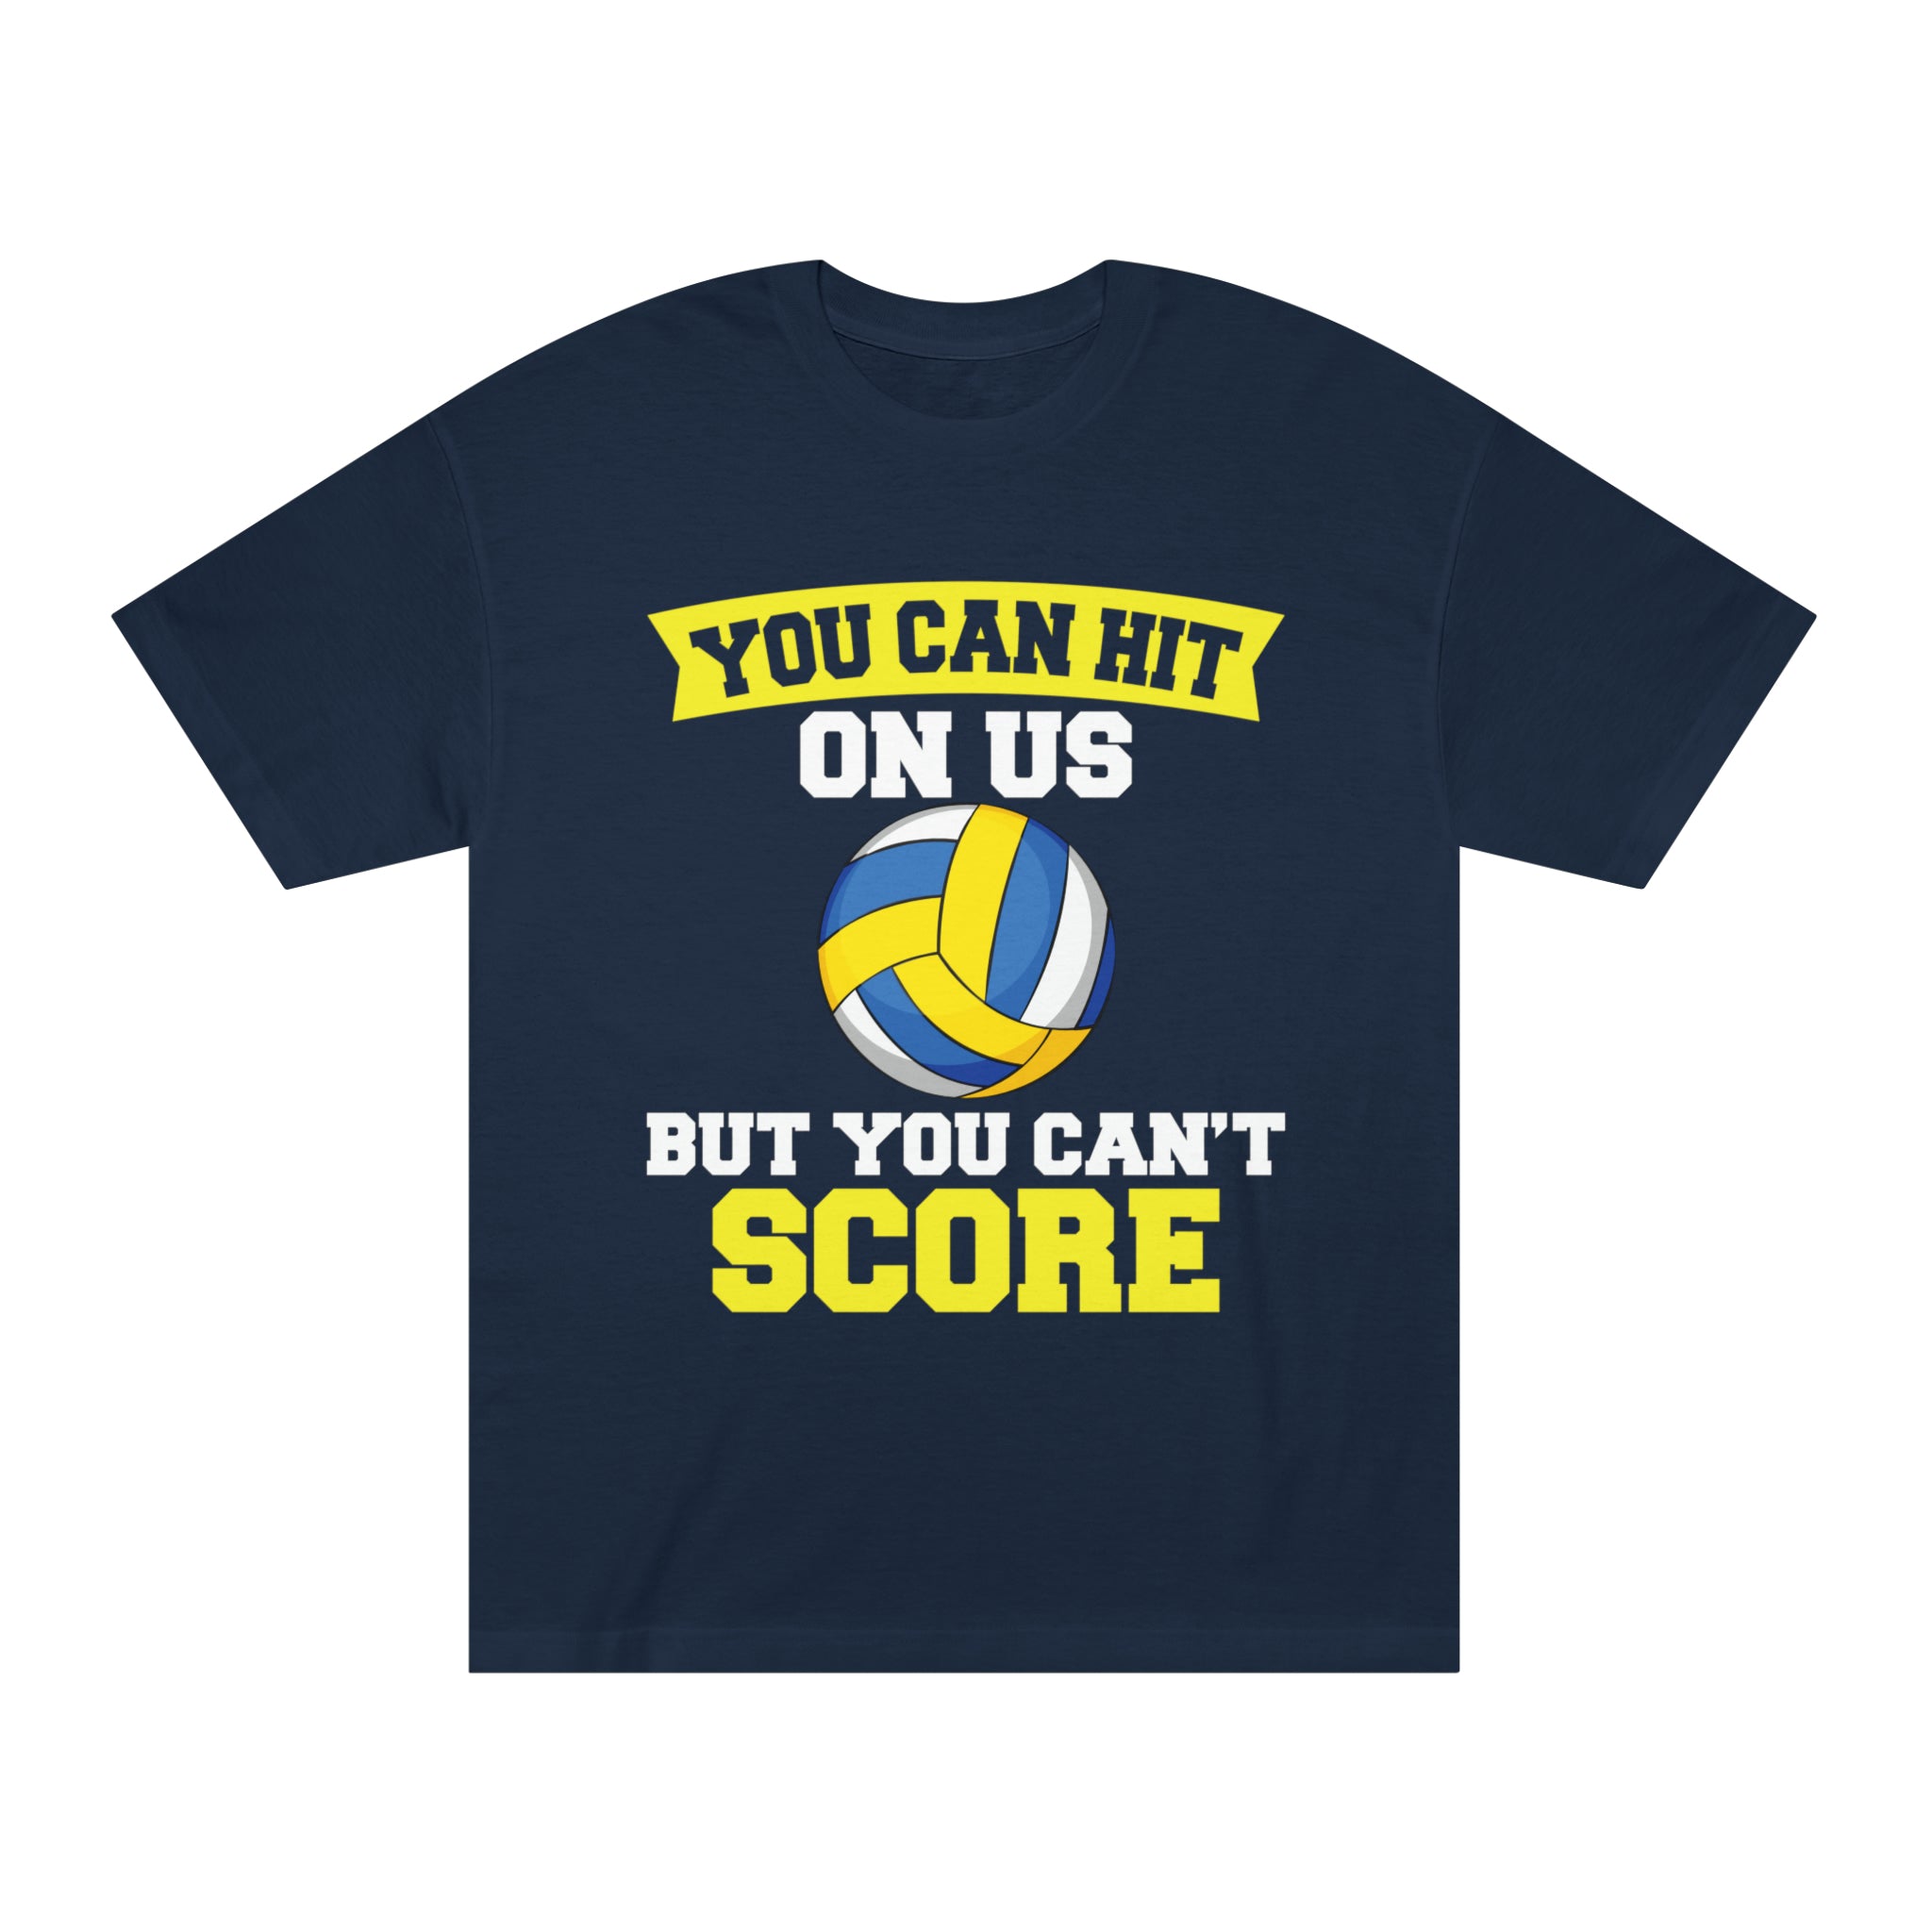 You Can Hit ON US but can't score Unisex Tee